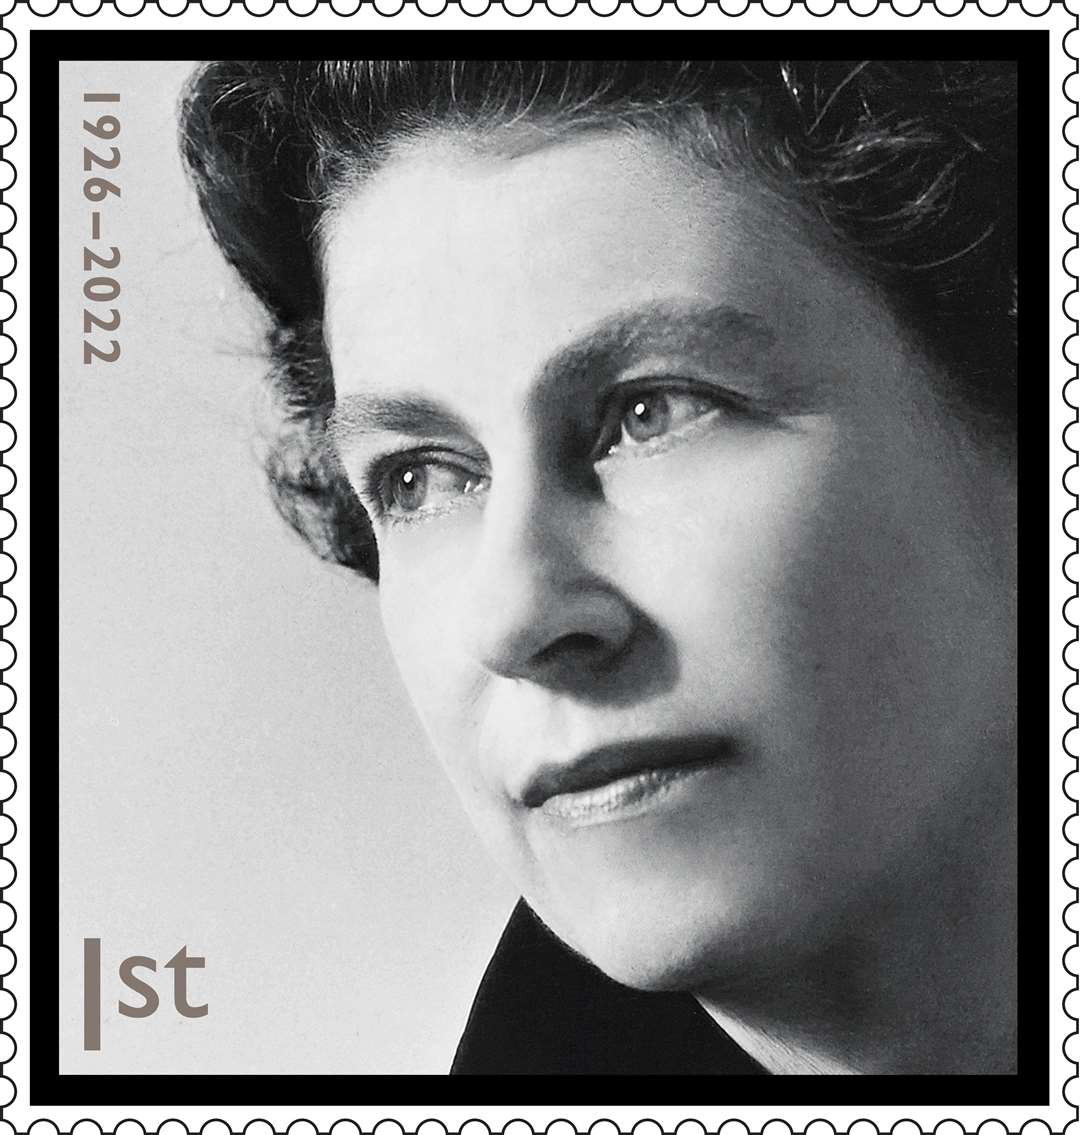 The image on the 1st class stamp – photographed by Cecil Beaton – was taken in1968. Picture: Royal Mail.